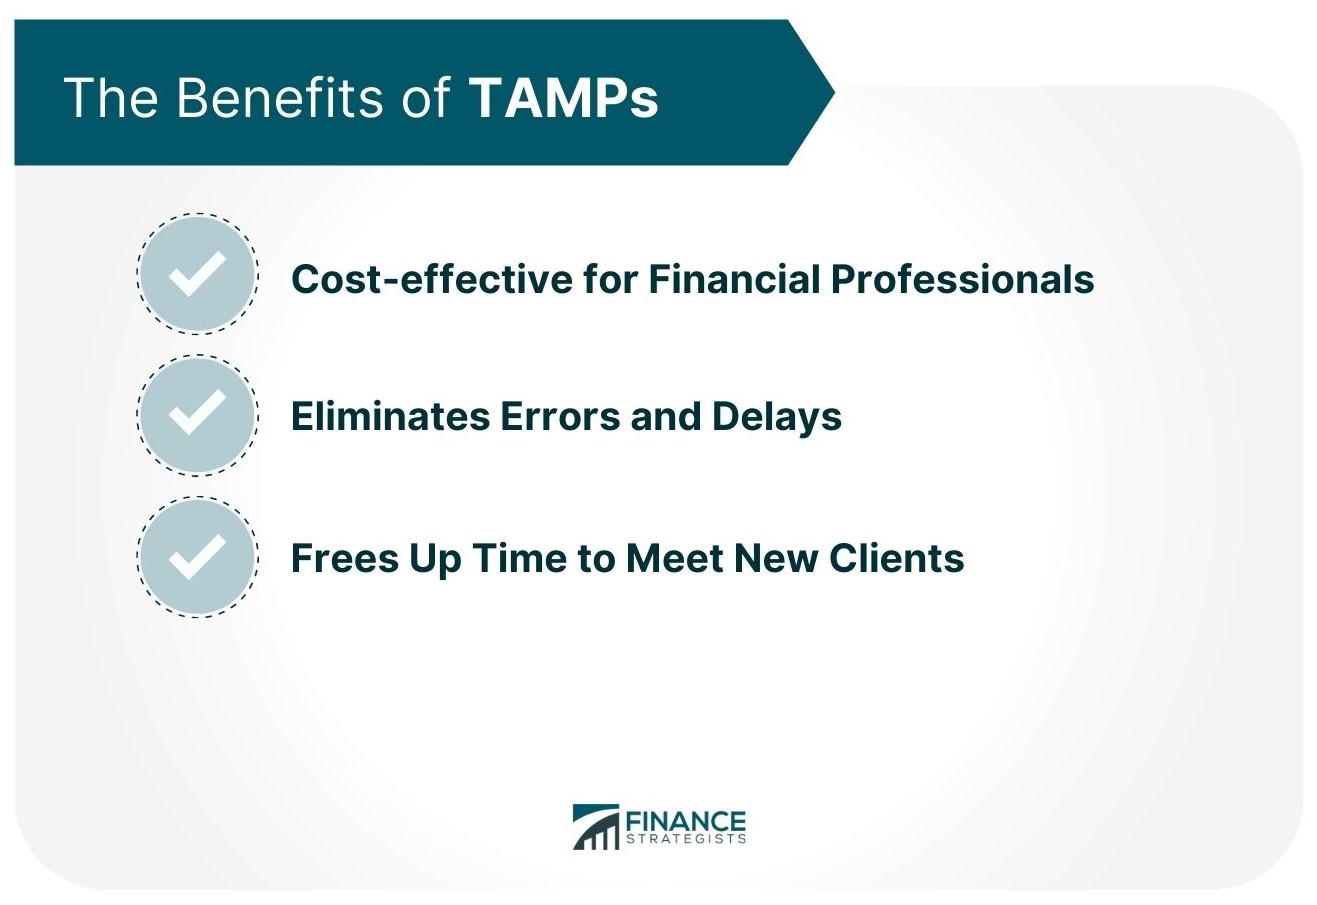 The Benefits of TAMPs